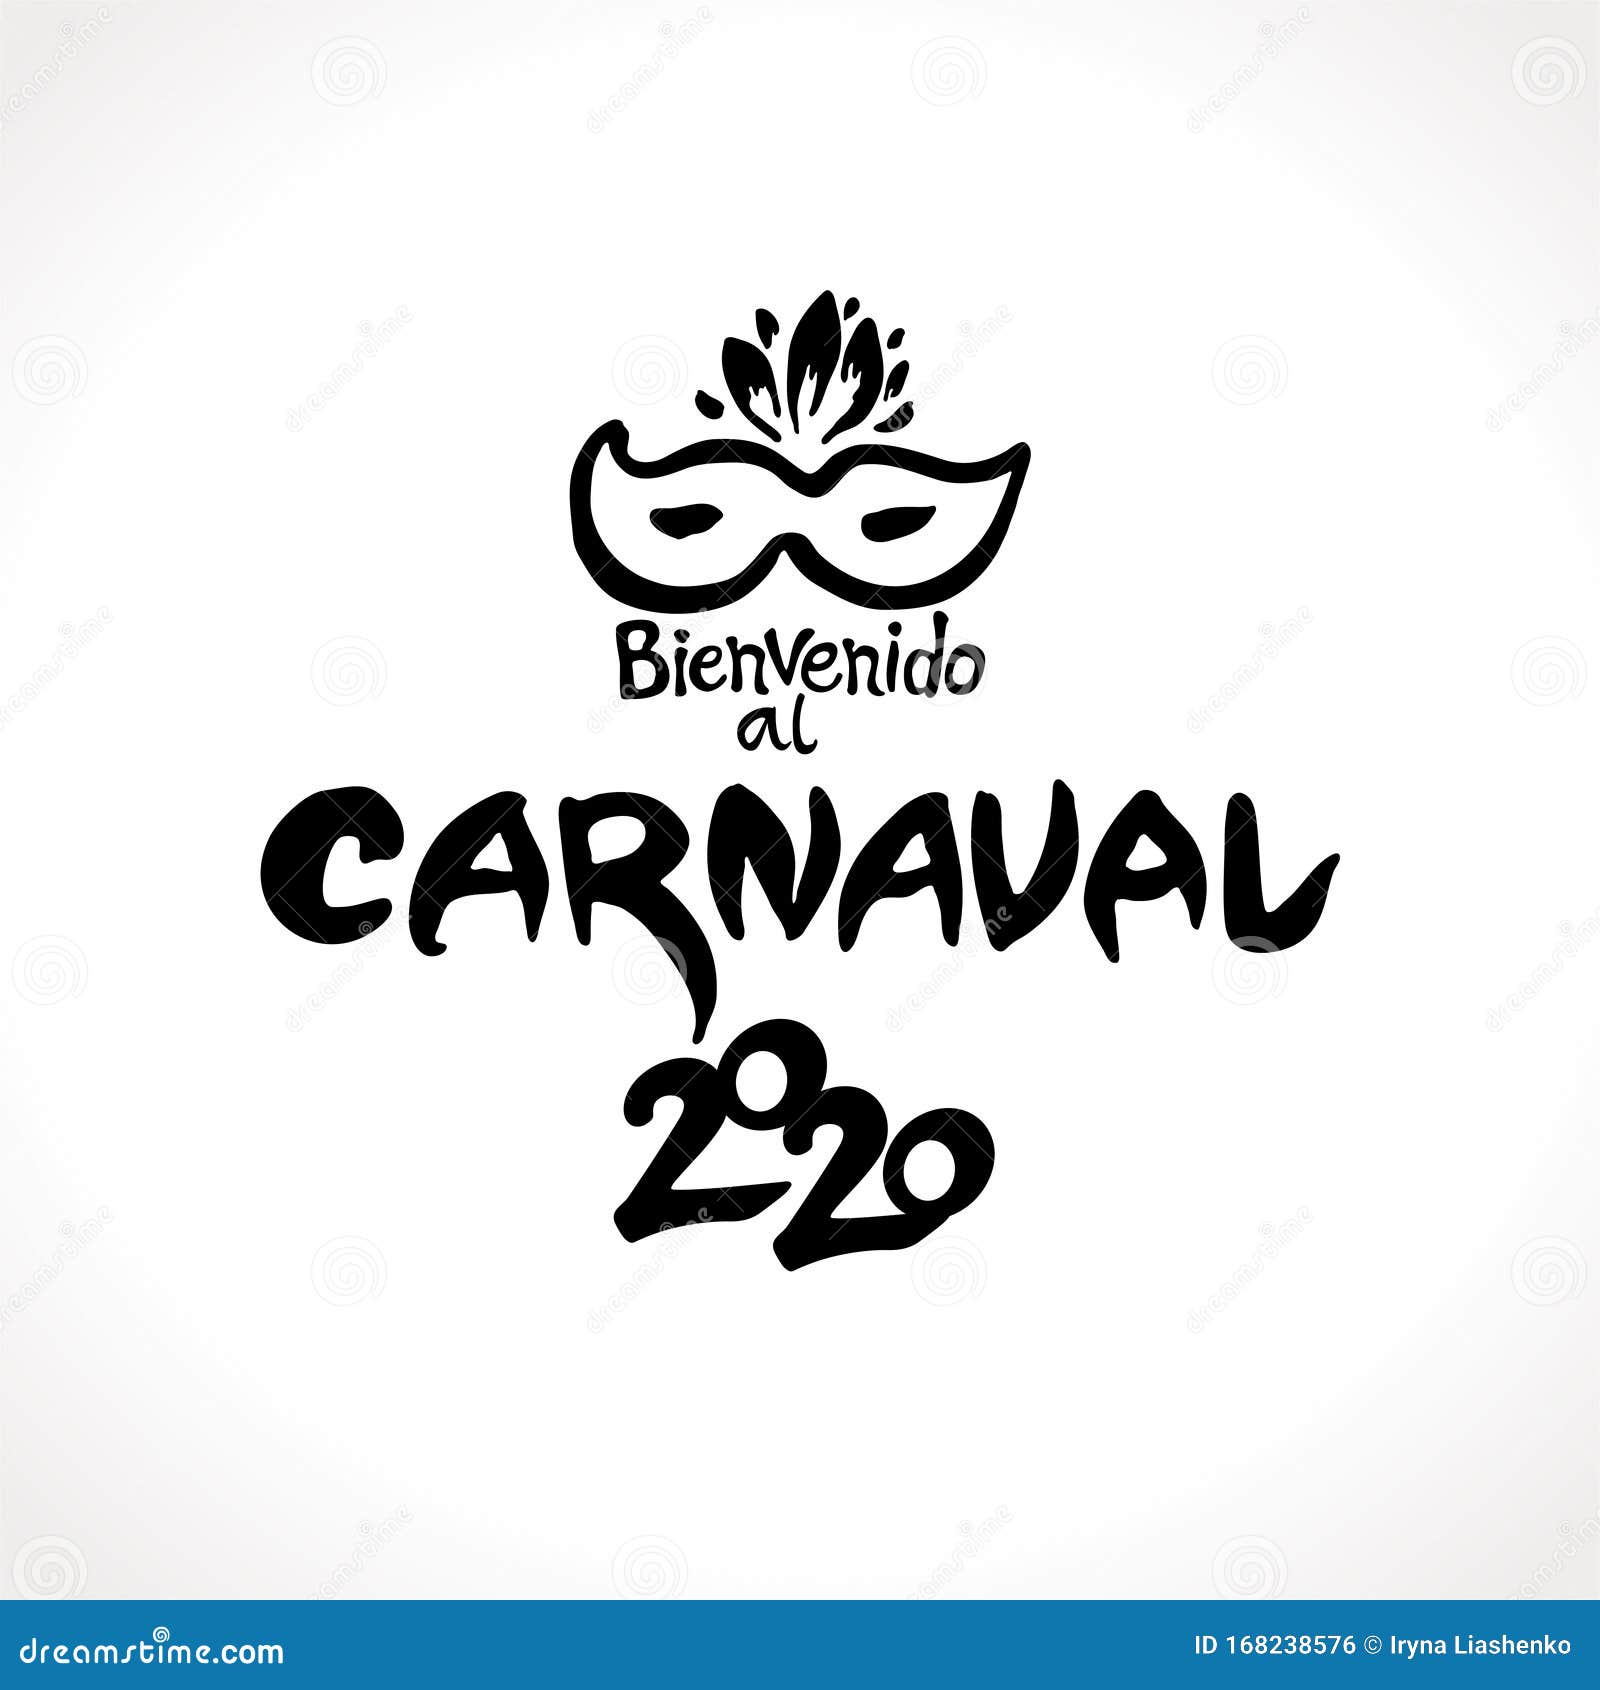 bienvenido al carnaval. 2019. logo in spanish. translated as welcome to carnival.  handwritten logo with mask.